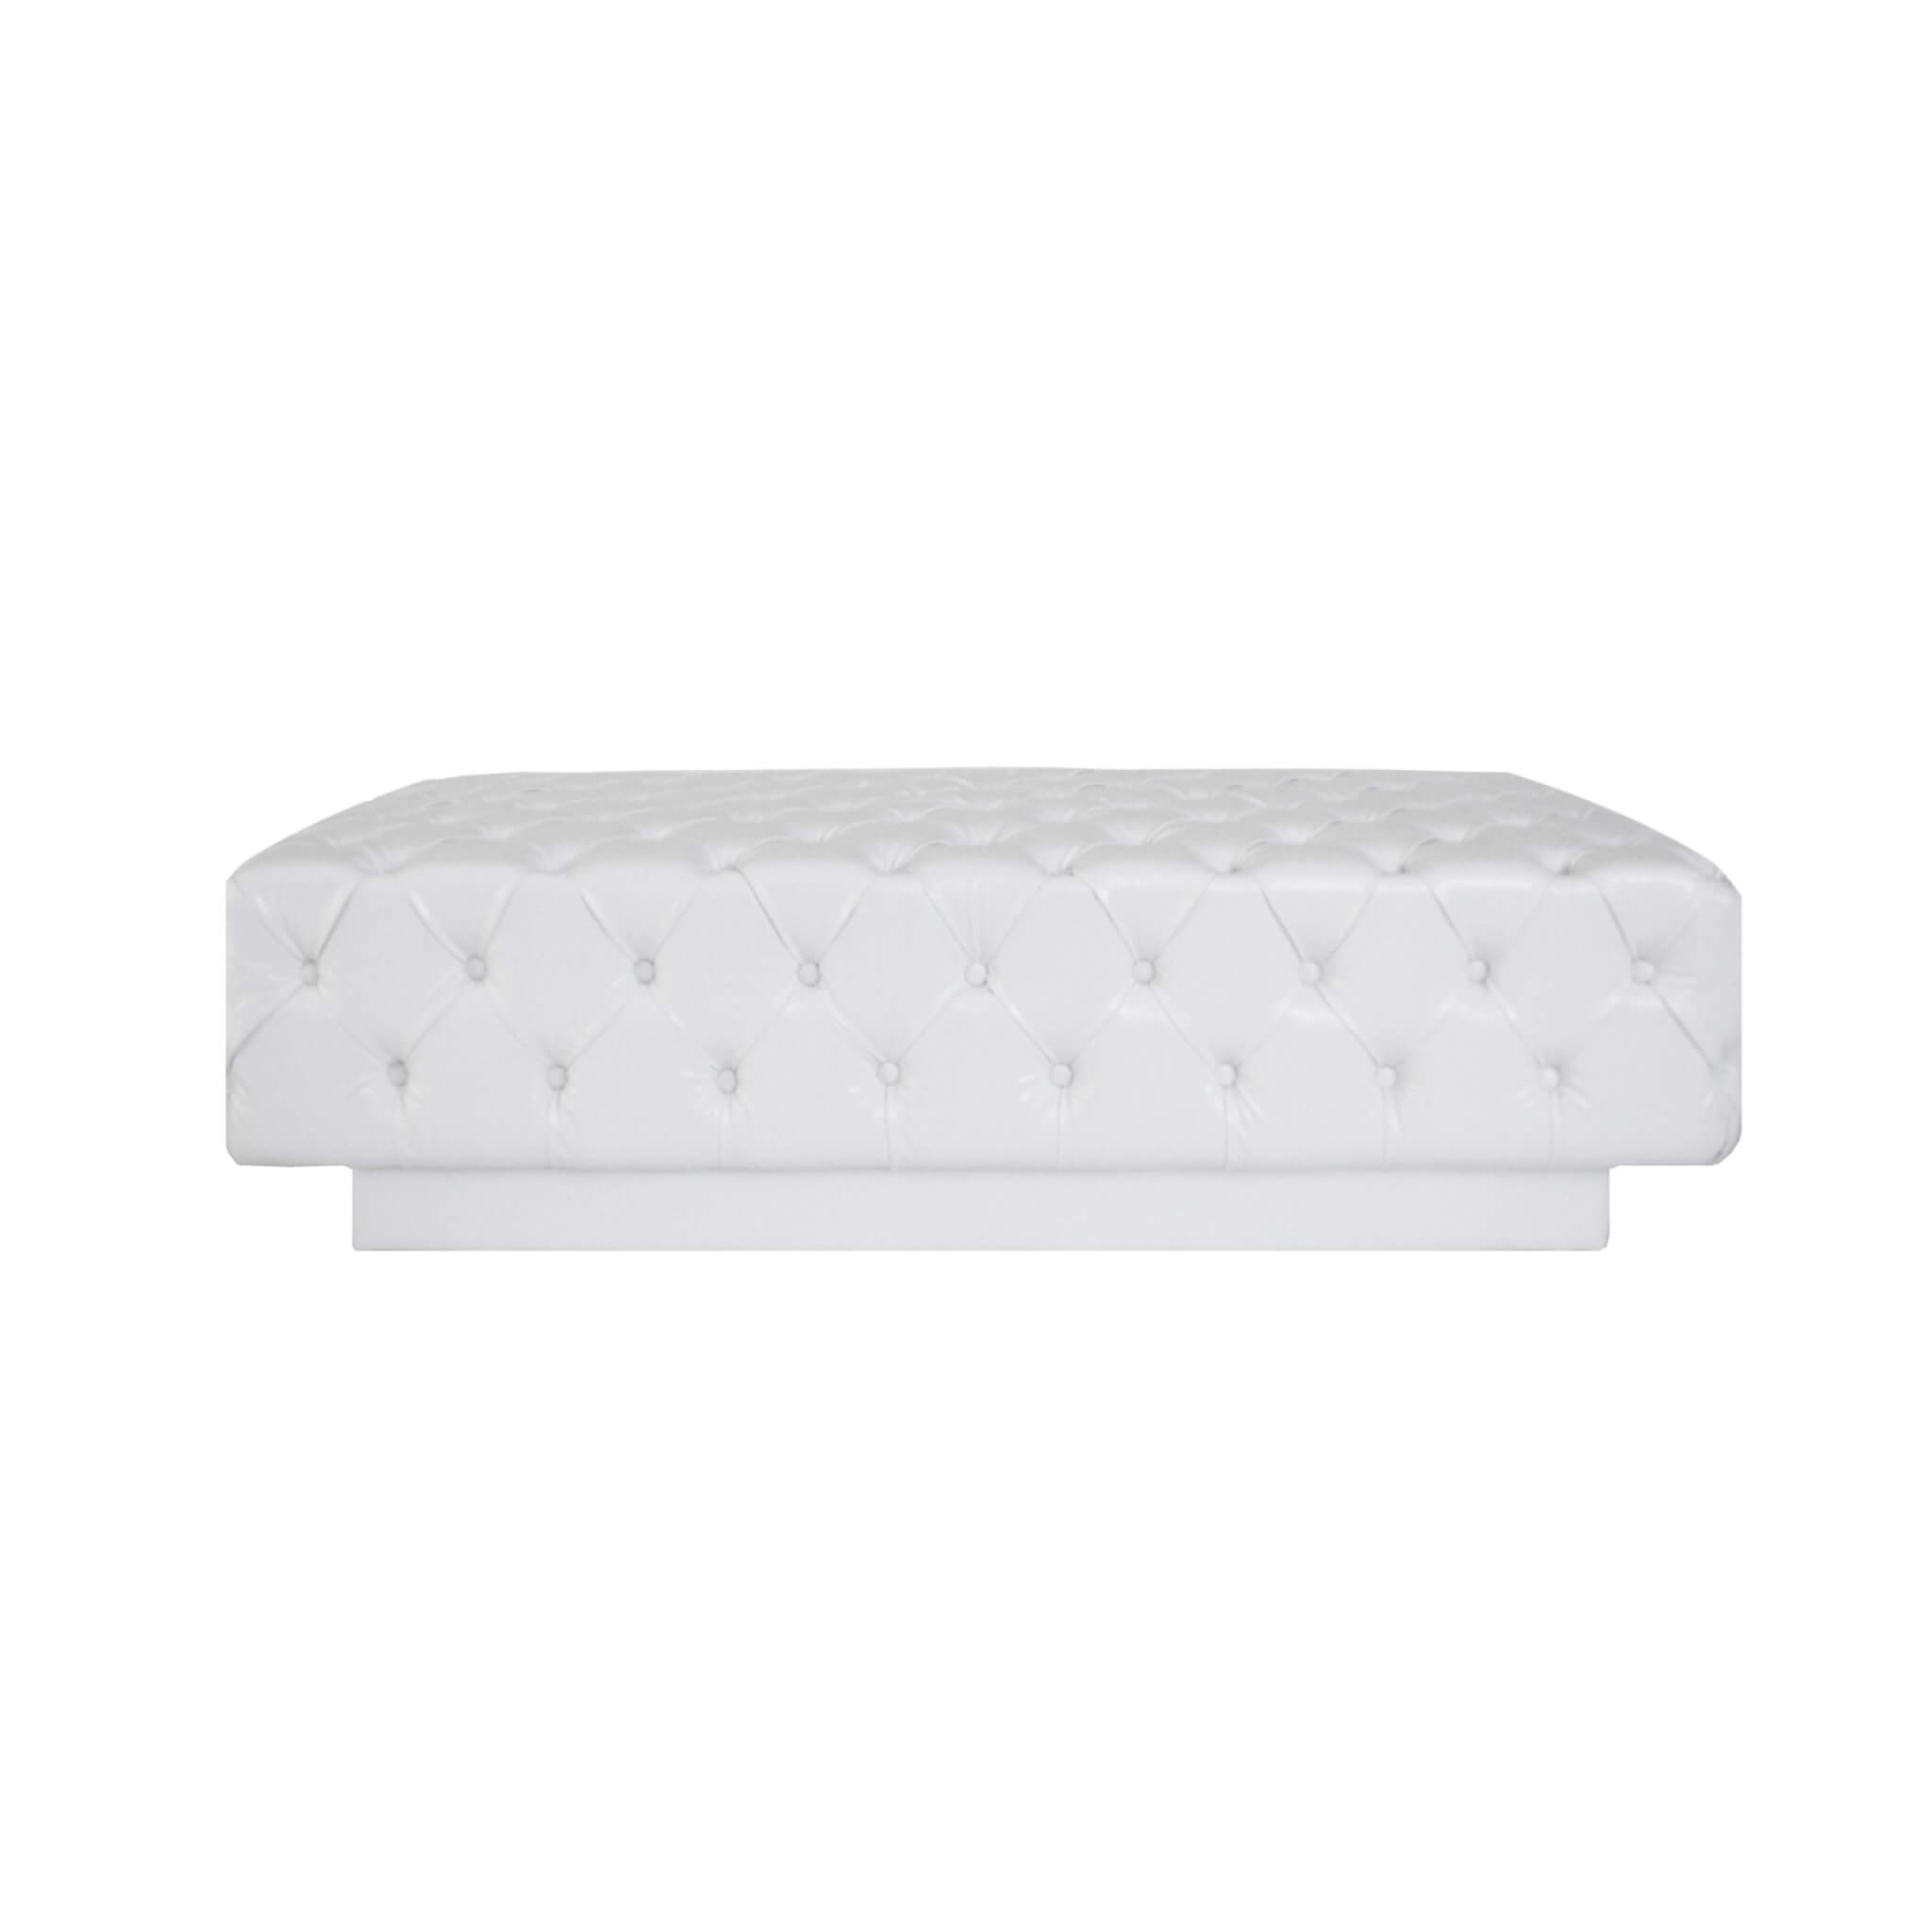 Versailles Daybed – White – 150cmL x 70cmW x 40cmH